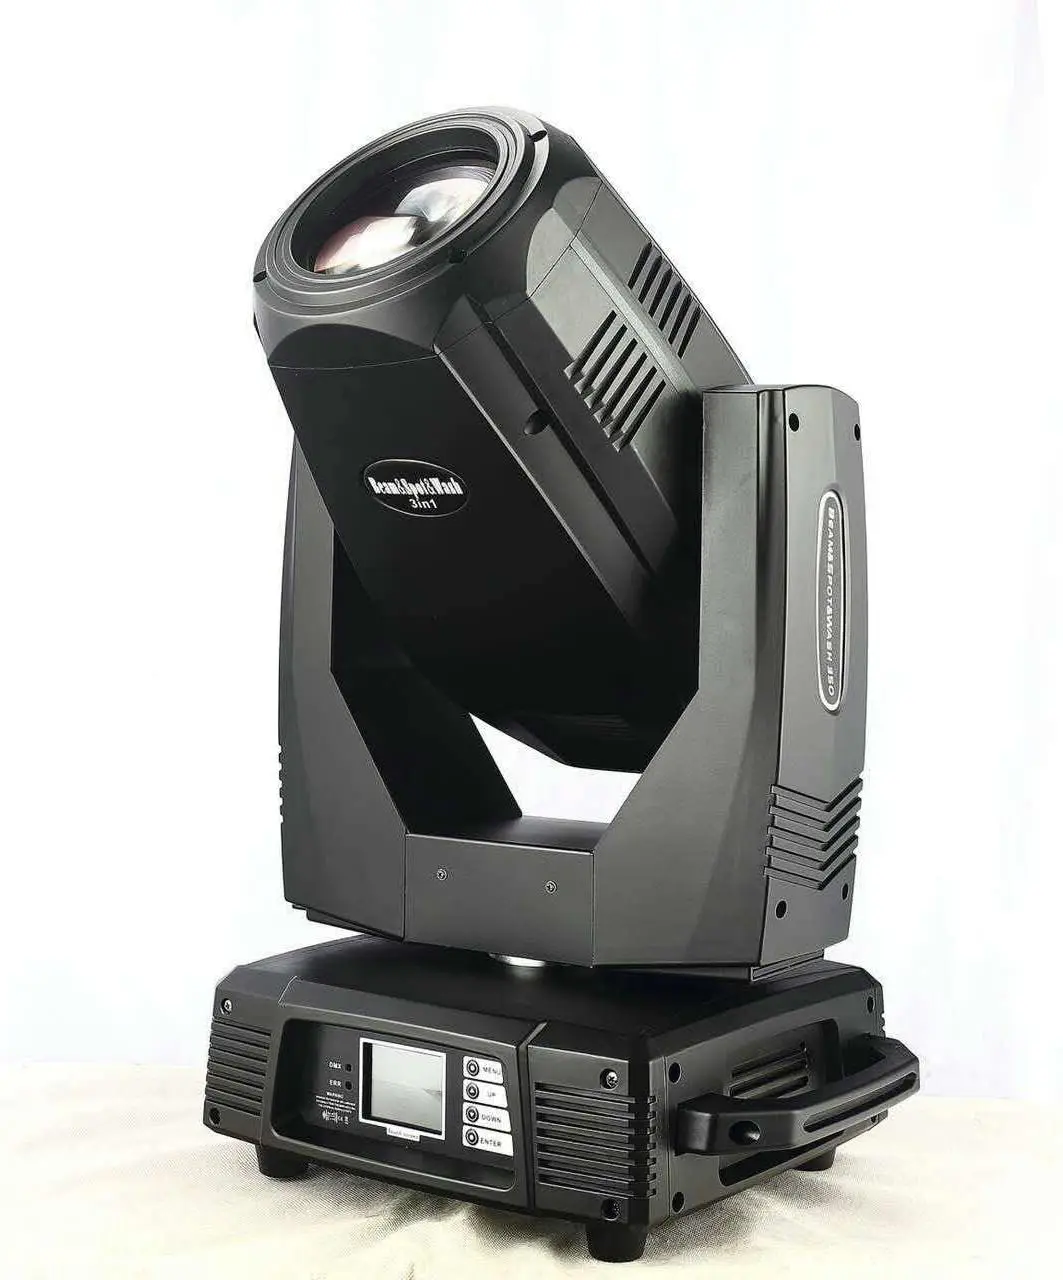 Stage 350W Moving Head Light 17R DMX/Auto/Sound Control Mode RGB 3in1 for DJ Party Stadium Stage Concert Show